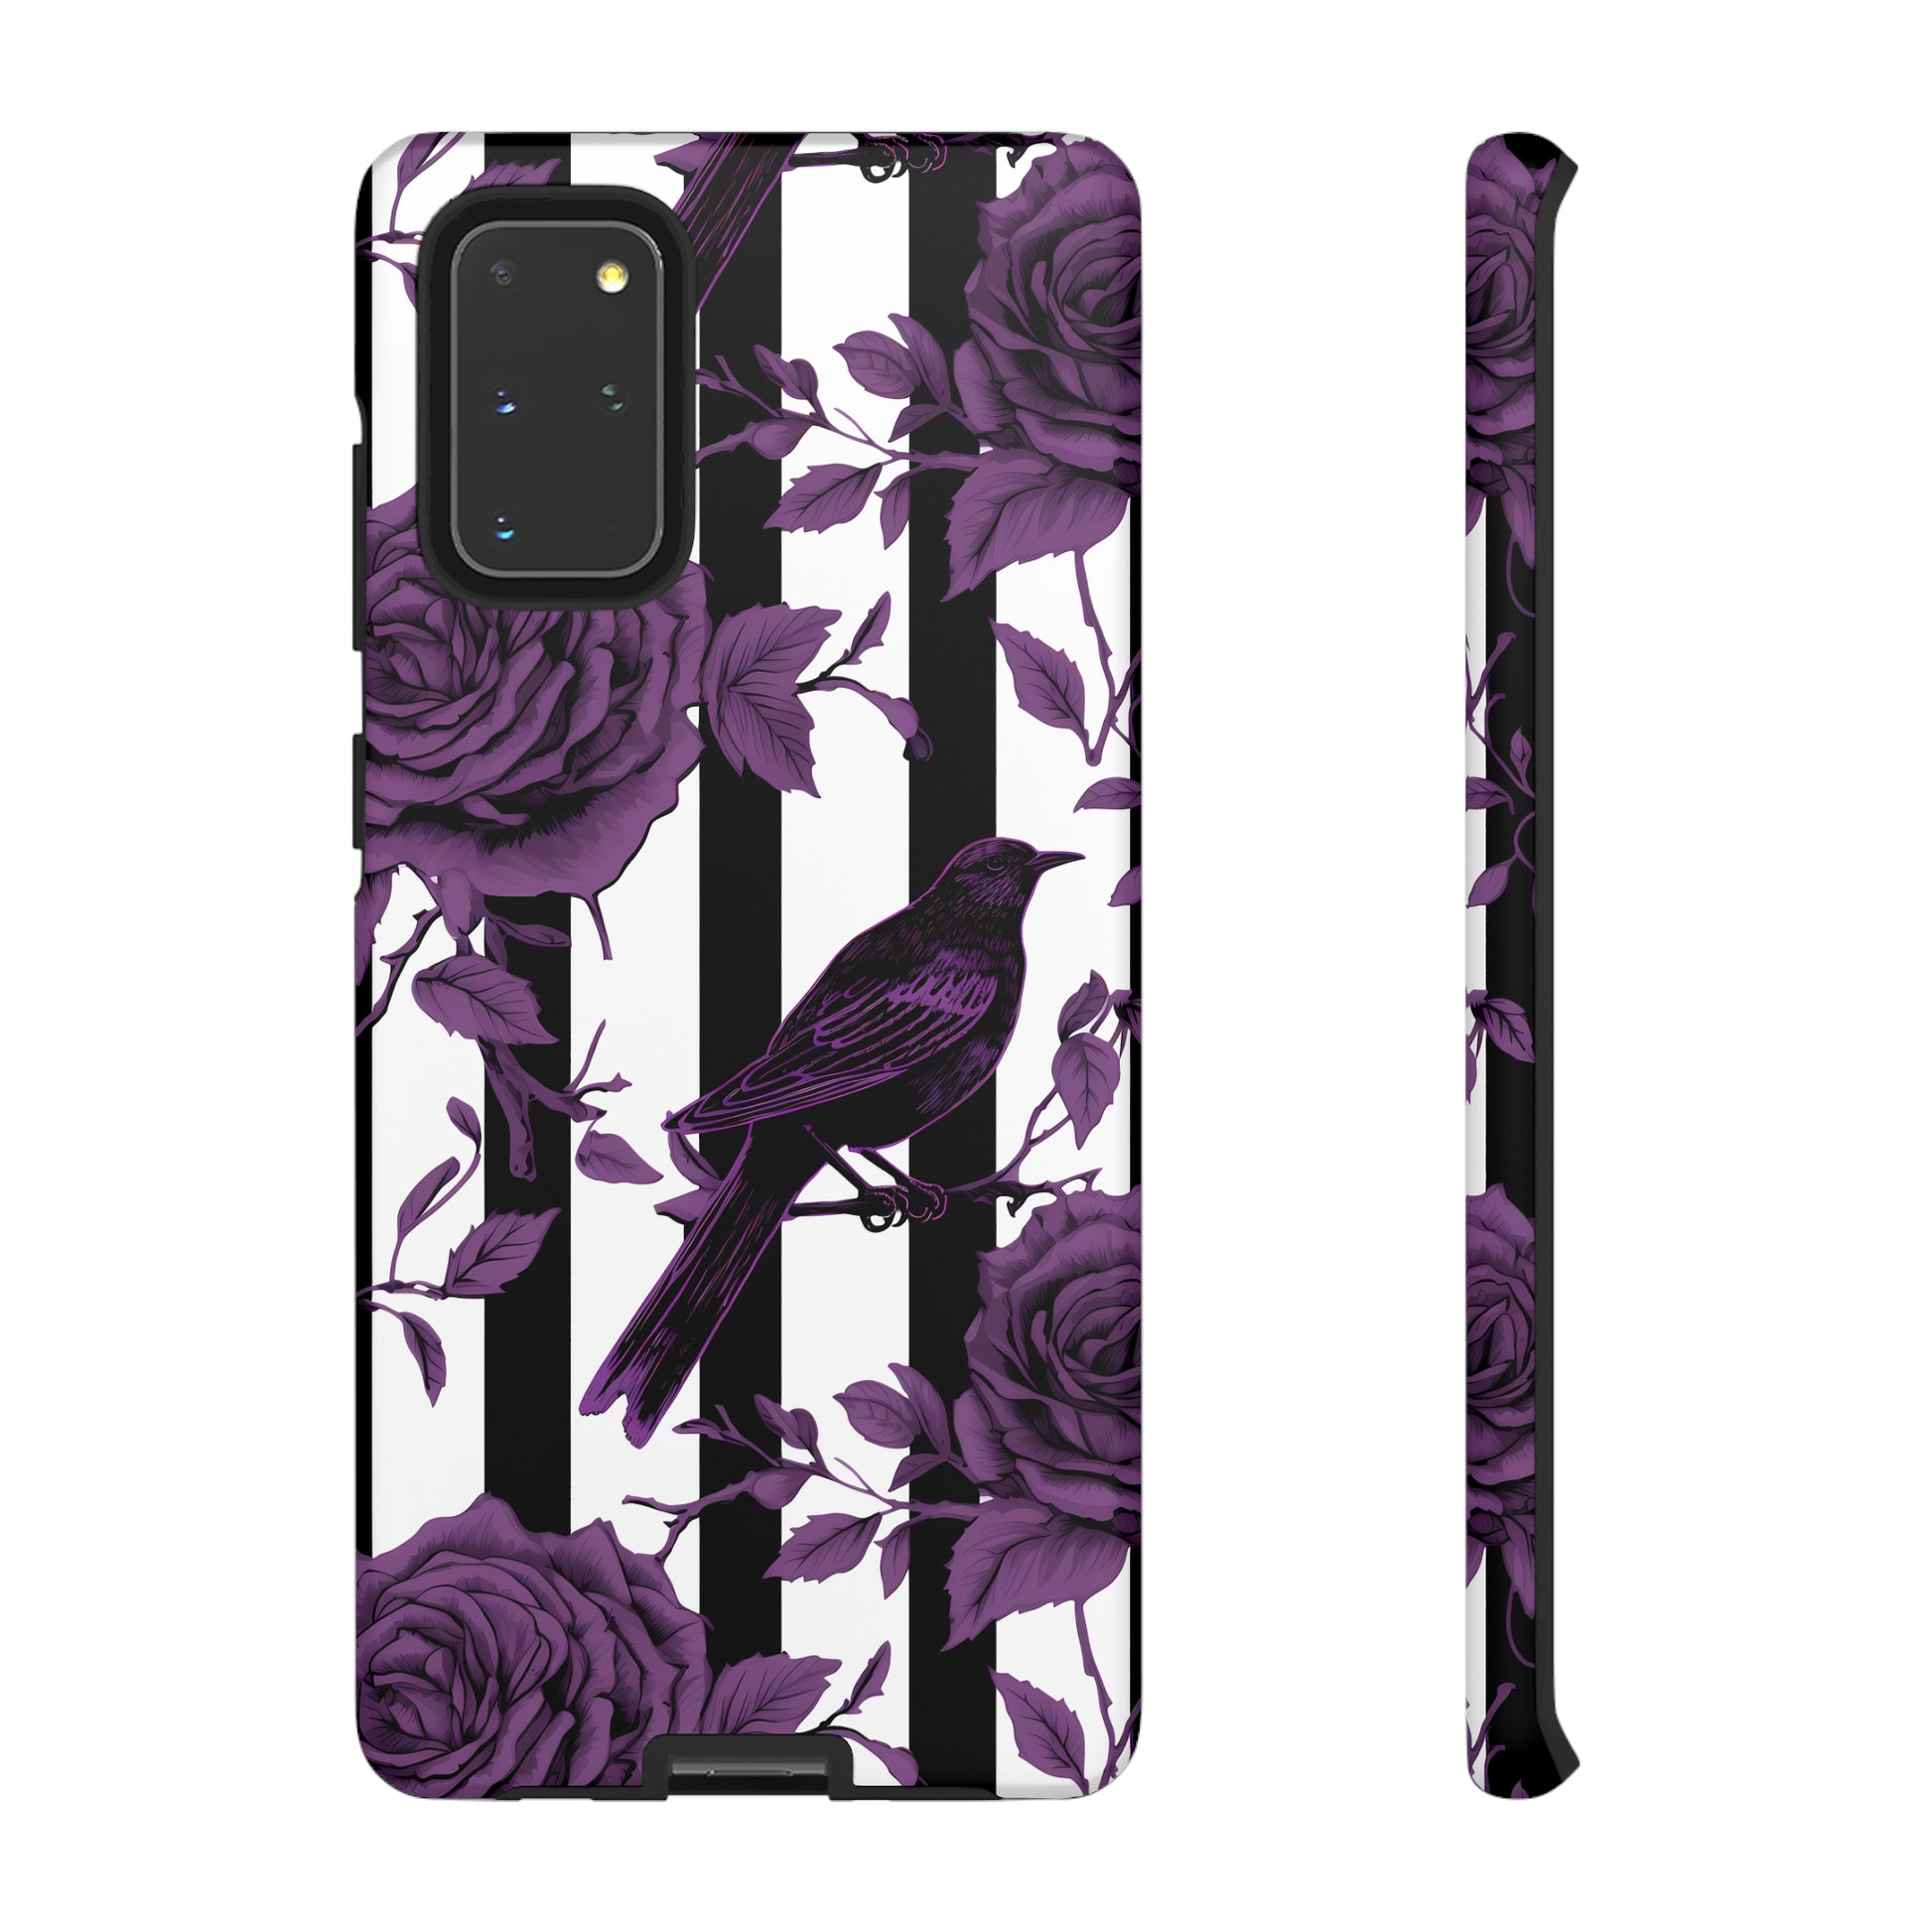 Striped Crows and Roses Tough Cases for iPhone Samsung Google PhonesPhone CaseVTZdesignsSamsung Galaxy S20+MatteAccessoriescrowsGlossy